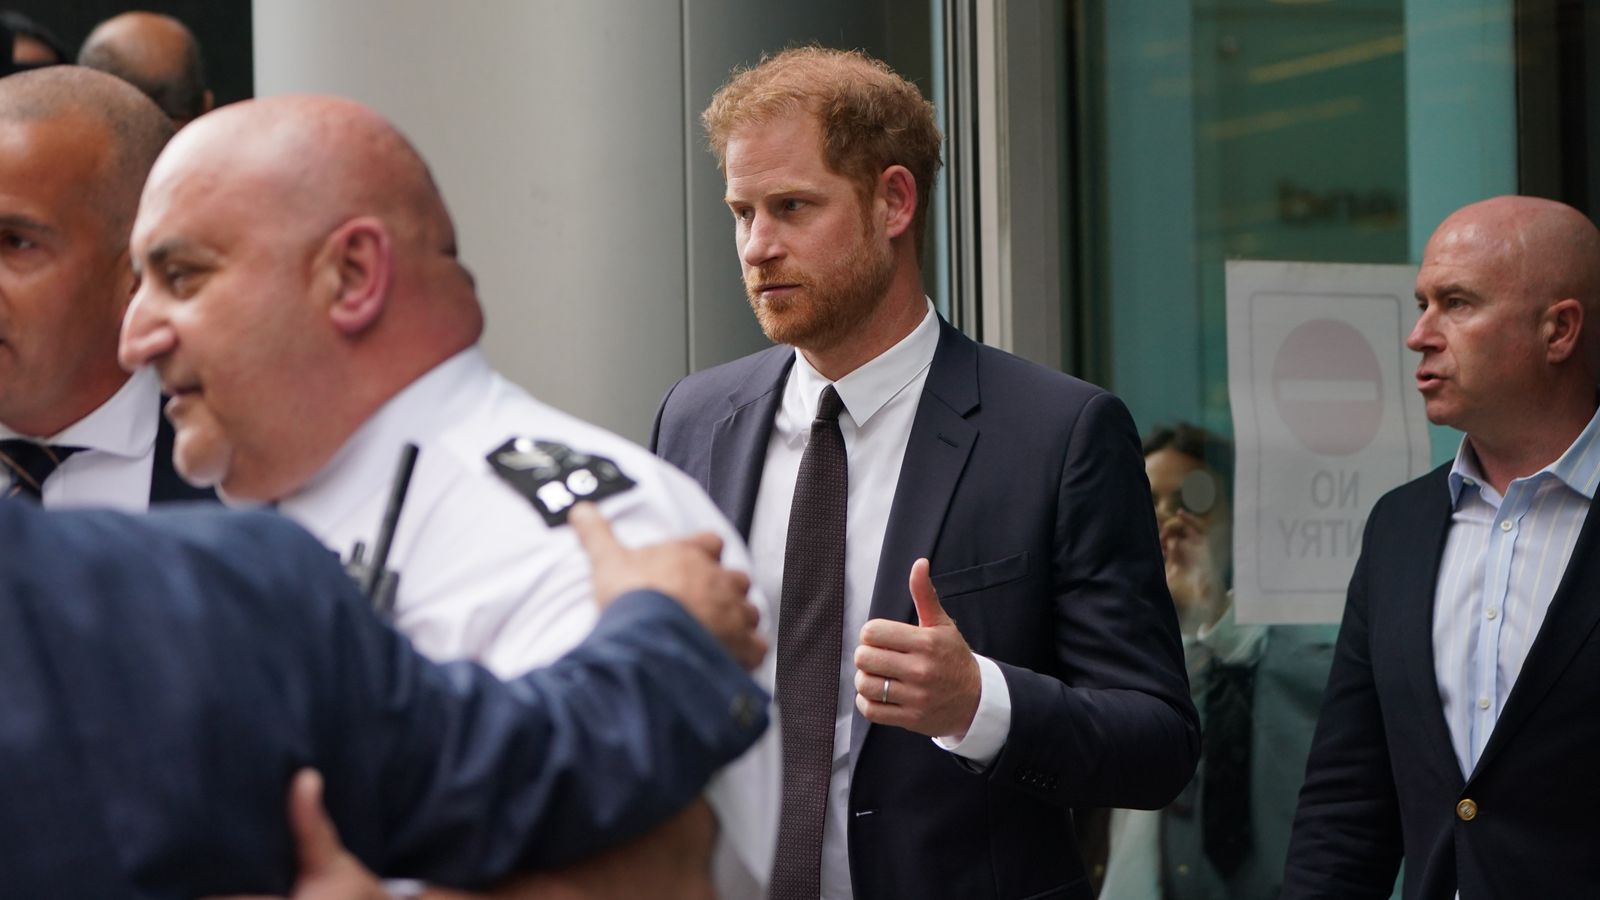 Prince Harry witness statement: Duke blames tabloids for 'inciting hatred' - and casting him as a 'thicko' and a 'playboy'